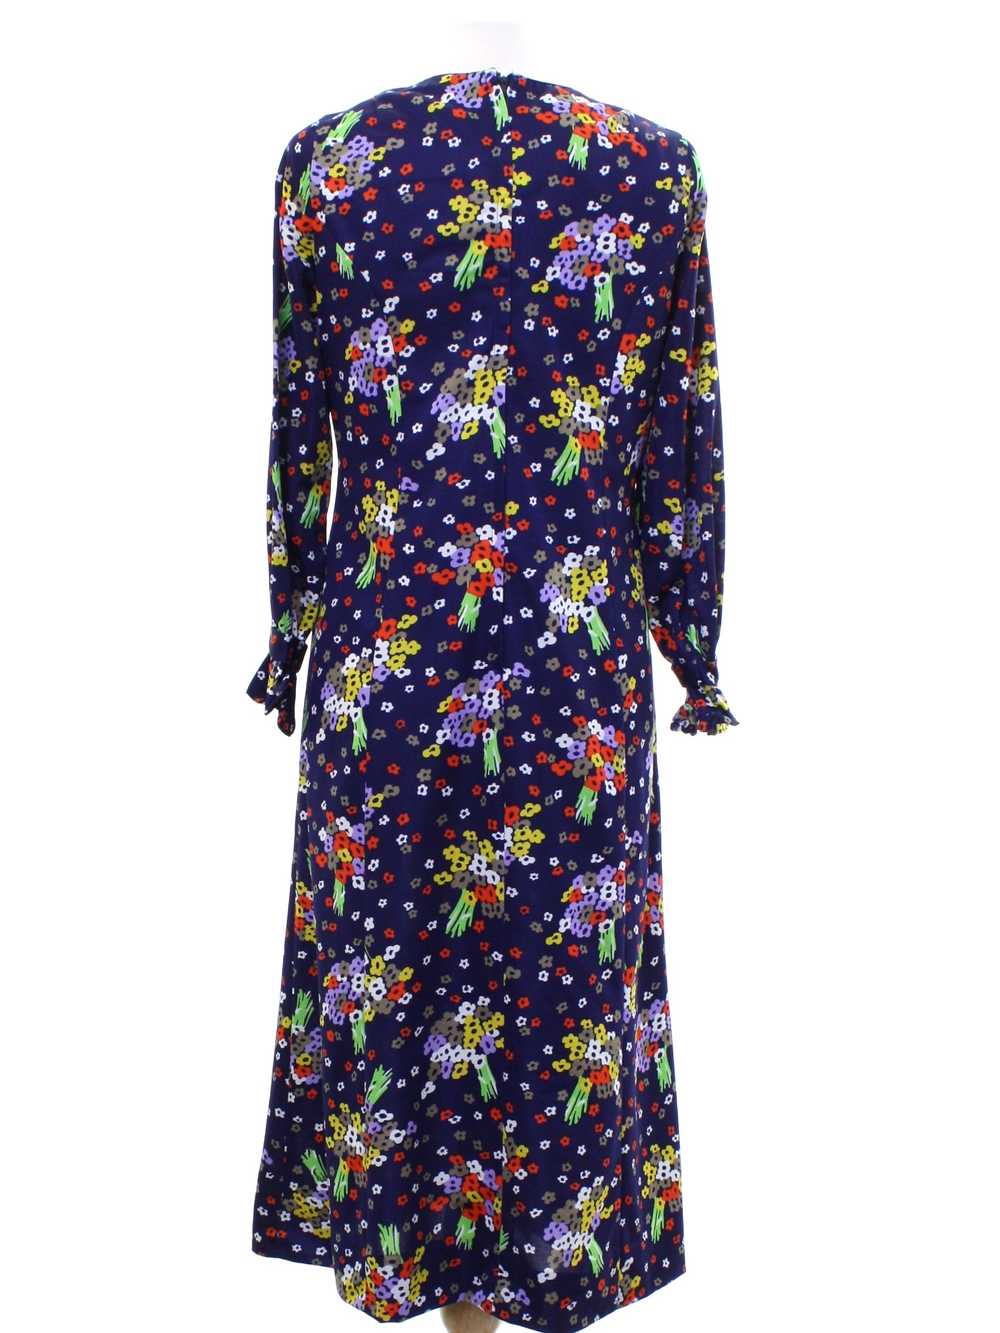 1970's A and R A-Line Knit Dress - image 3